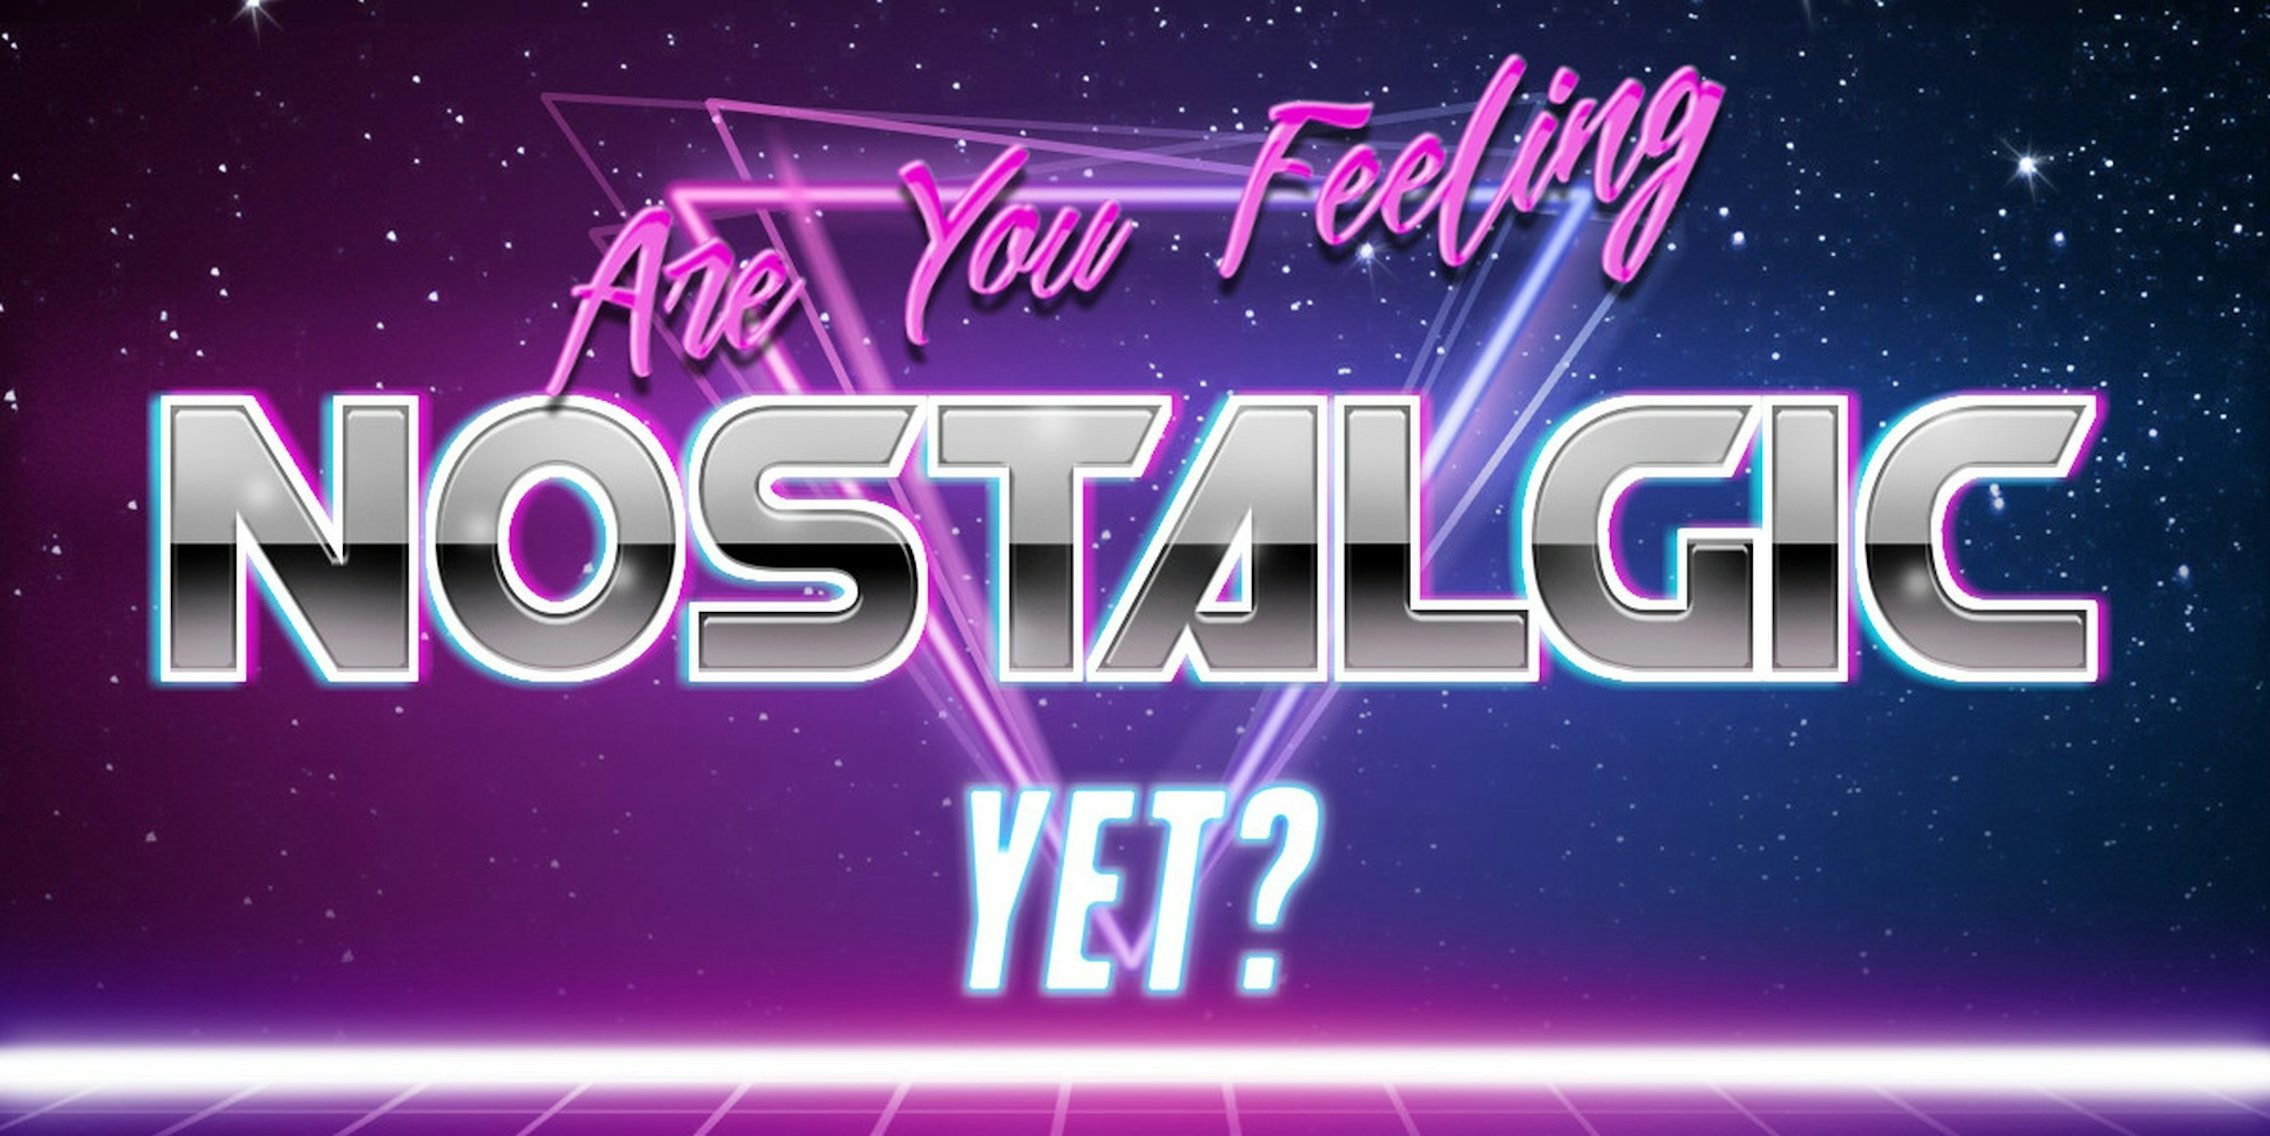 This '80s Aesthetic Text Generator Pretty Rad and Totally Free